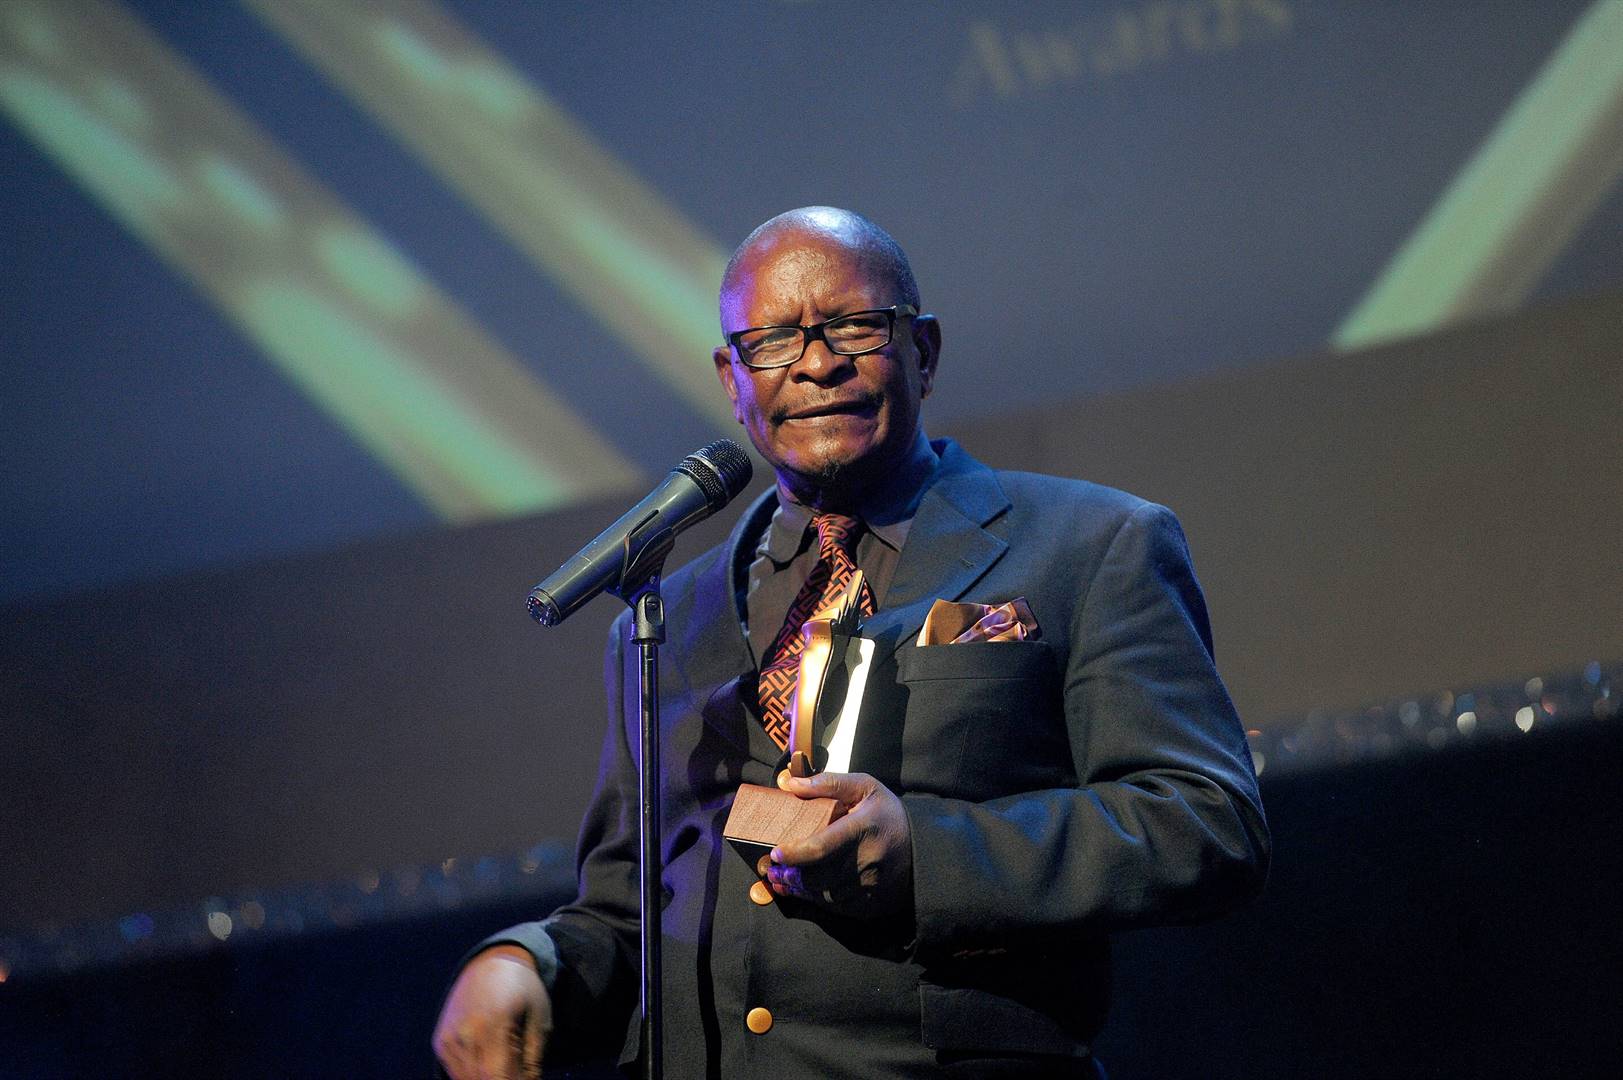 Mlangeni Nawa is looking to do more than entertain you as Richard on The Estate. He wants South Africans to wake up and see the world around them, for what it truly is. Picture: Gallo Images / Sowetan / Veli Nhlapo